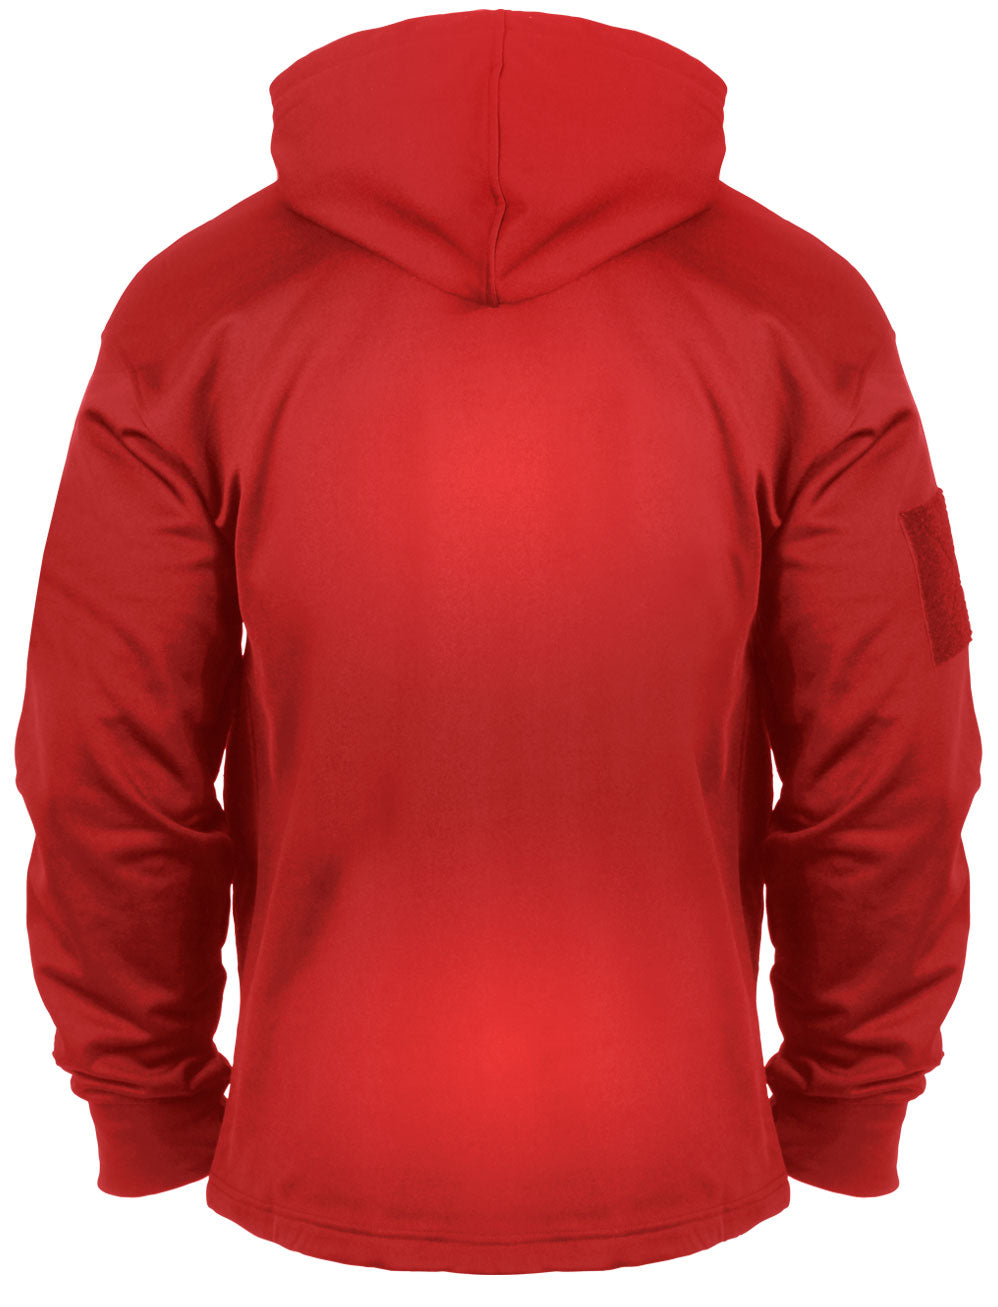 Men's Concealed Carry R.E.D. (Remember Everyone Deployed) Hoodie